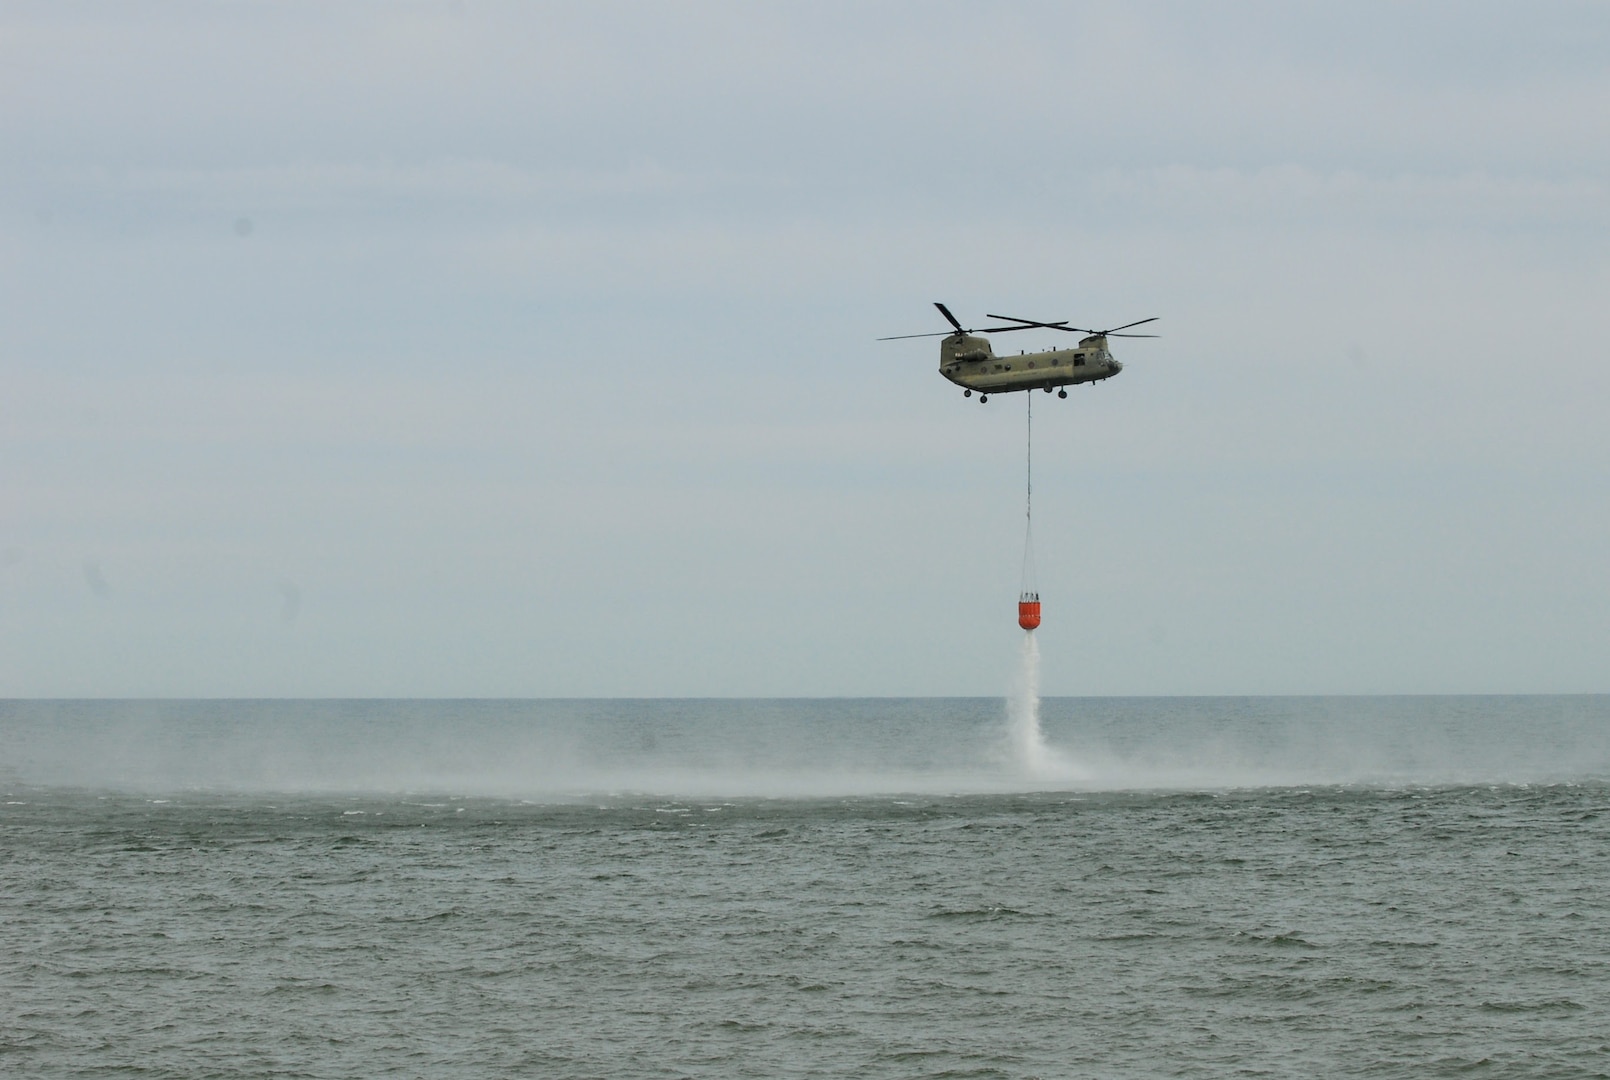 A New York Army National Guard CH-47 Chinook helicopter dumps 2,000 gallons of water from a bucket over Lake Ontario near Hamlin, New York, May 6, 2020. The Chinook's pilots and crew were practicing scooping and dumping water in preparation for firefighting missions.